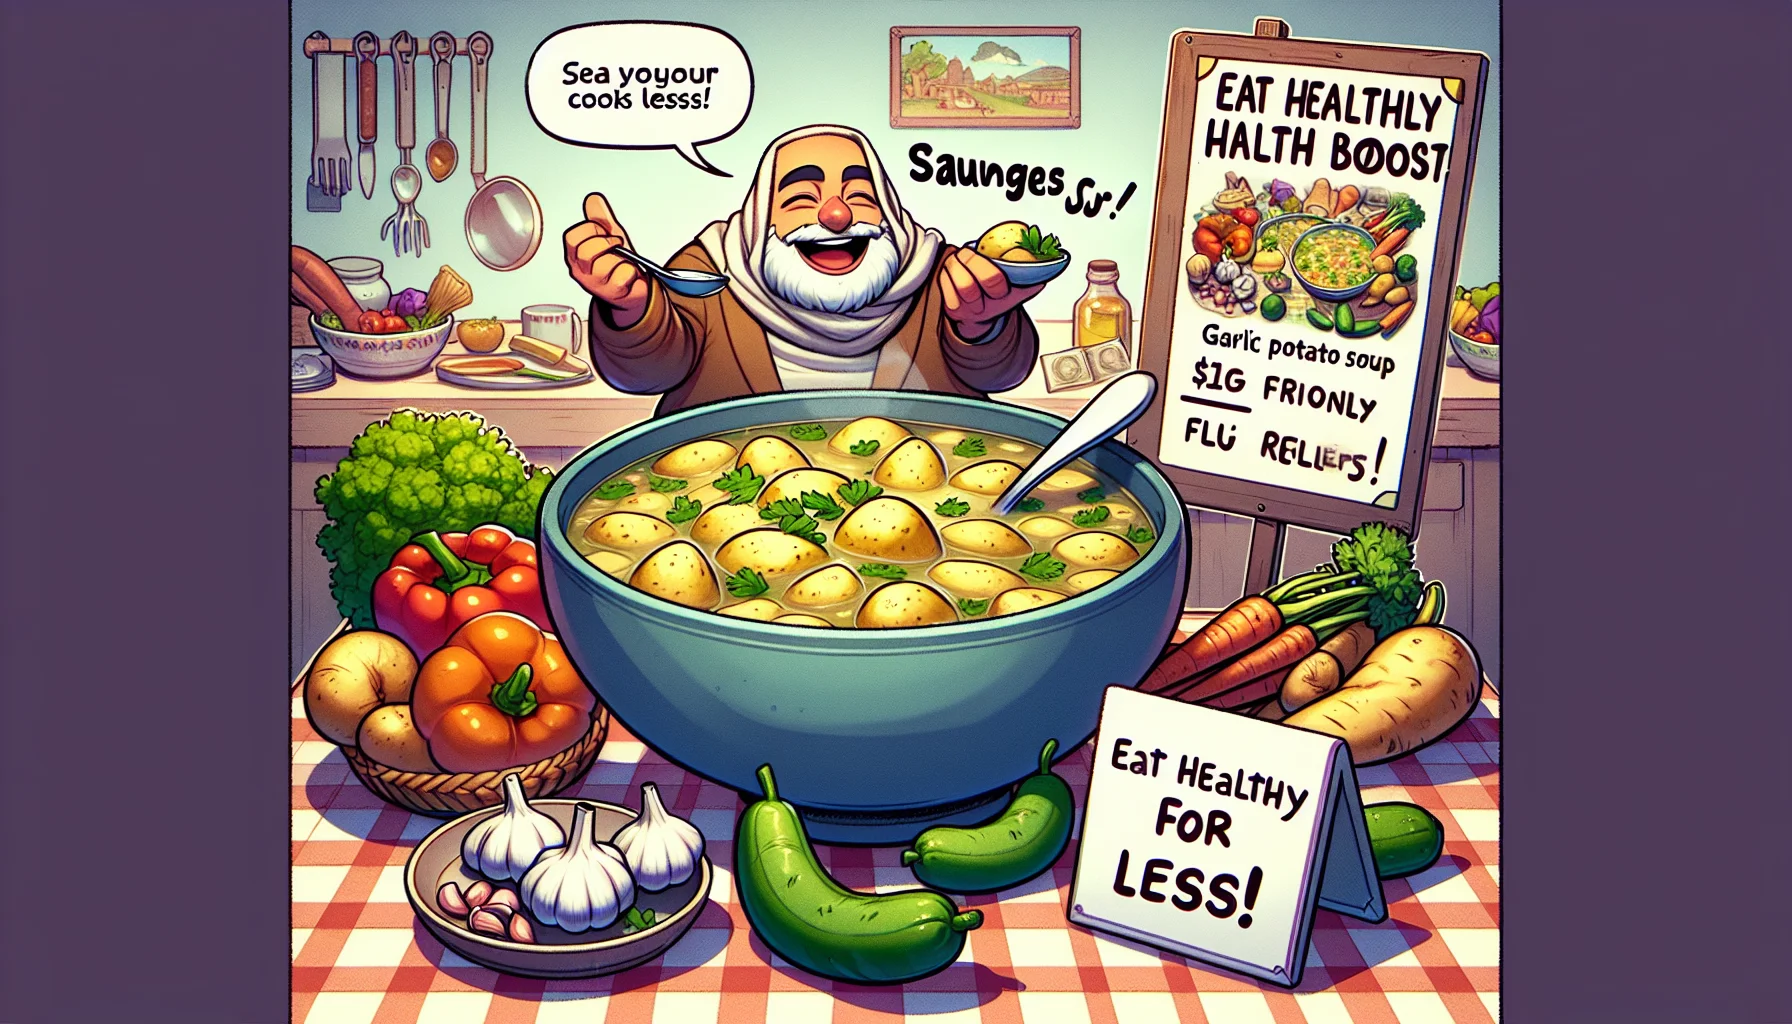 Imagine a comical scene where a big bowl of garlic potato soup, known for flu relief, is sitting on a table. Next to it are vegetables and a variety of other healthy ingredients, indicating an affordable yet nutritious meal. A cartoon-styled sign in the corner of the image reads 'Eat healthy for less!' To add a touch of humor, include a character, say a frugal Middle-Eastern man, chuckling as he lovingly scoops up a spoonful of the soup, clearly delighted with his 'budget-friendly health boost' choice. Make sure the details portray a warm, homely setting.